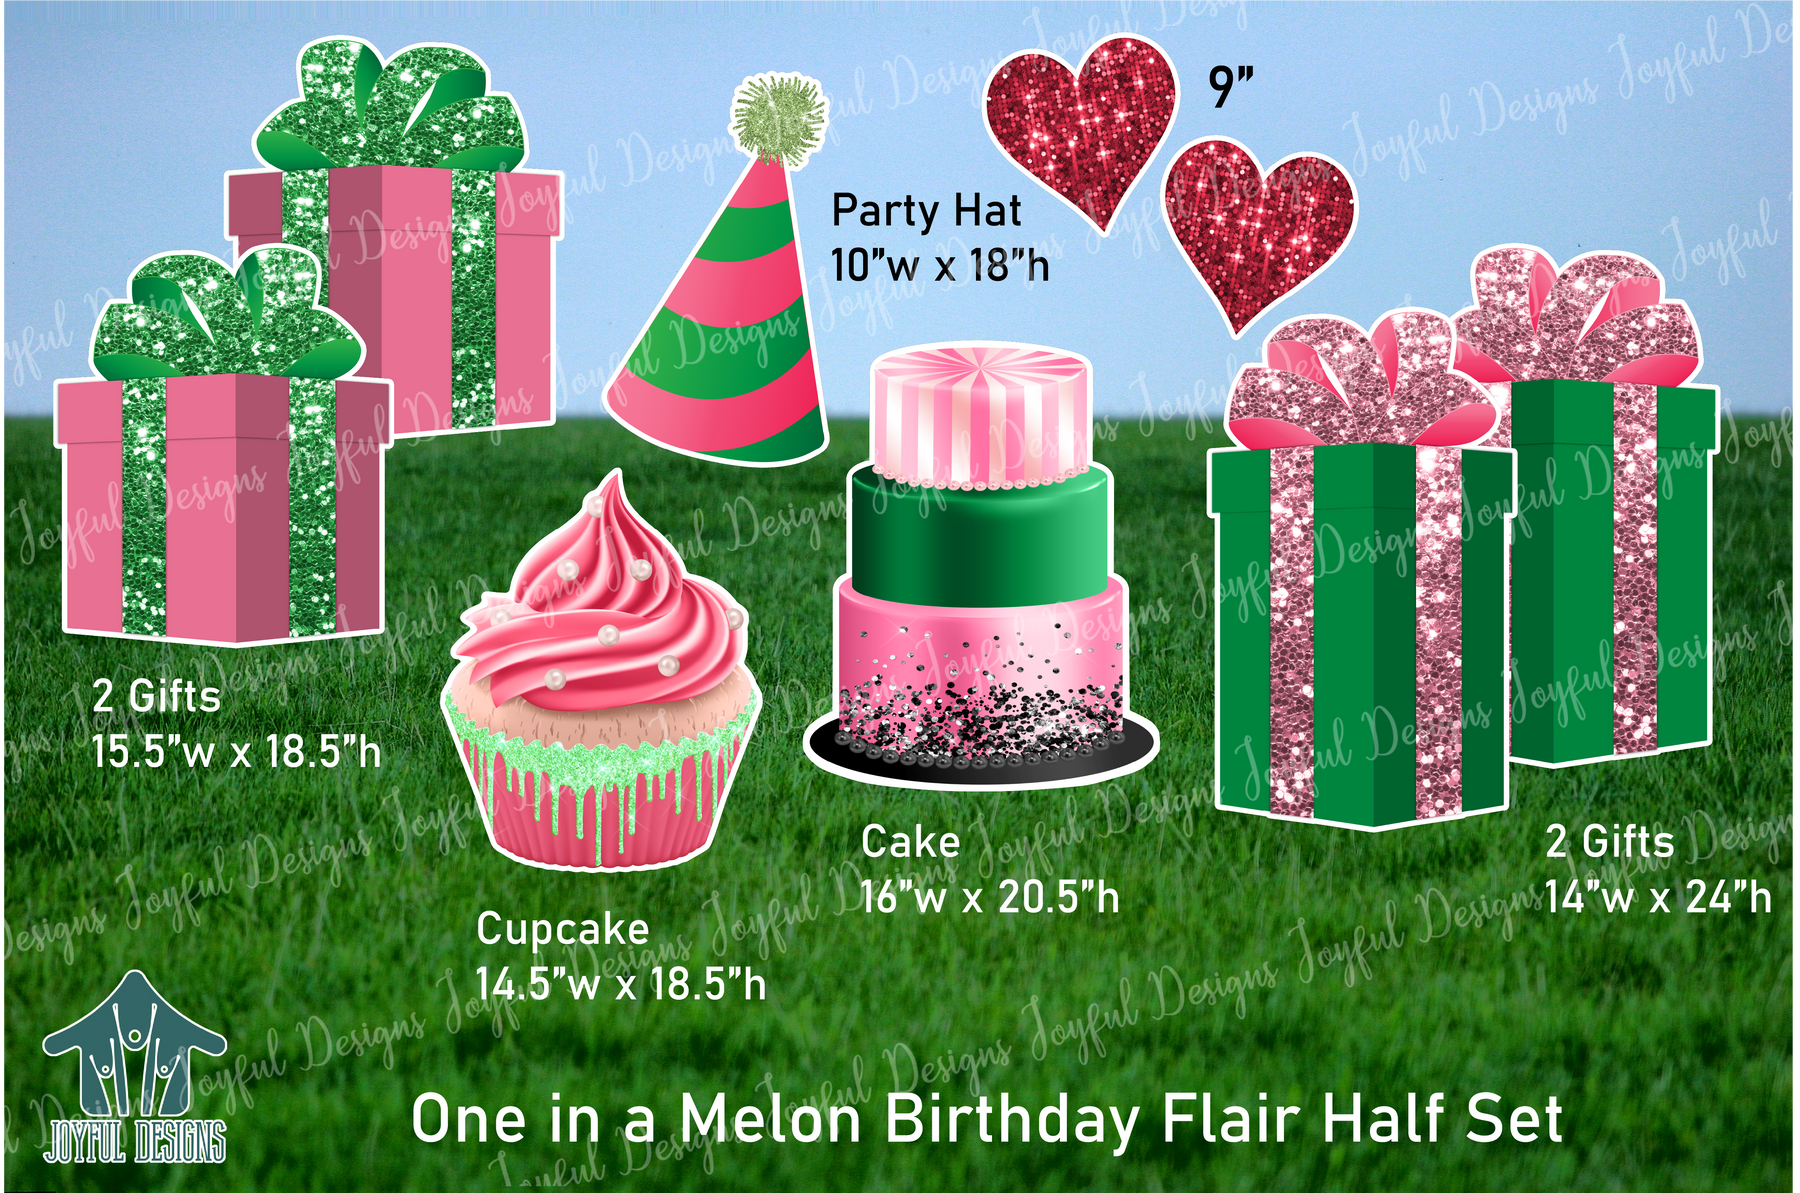 One in a Melon Birthday Flair